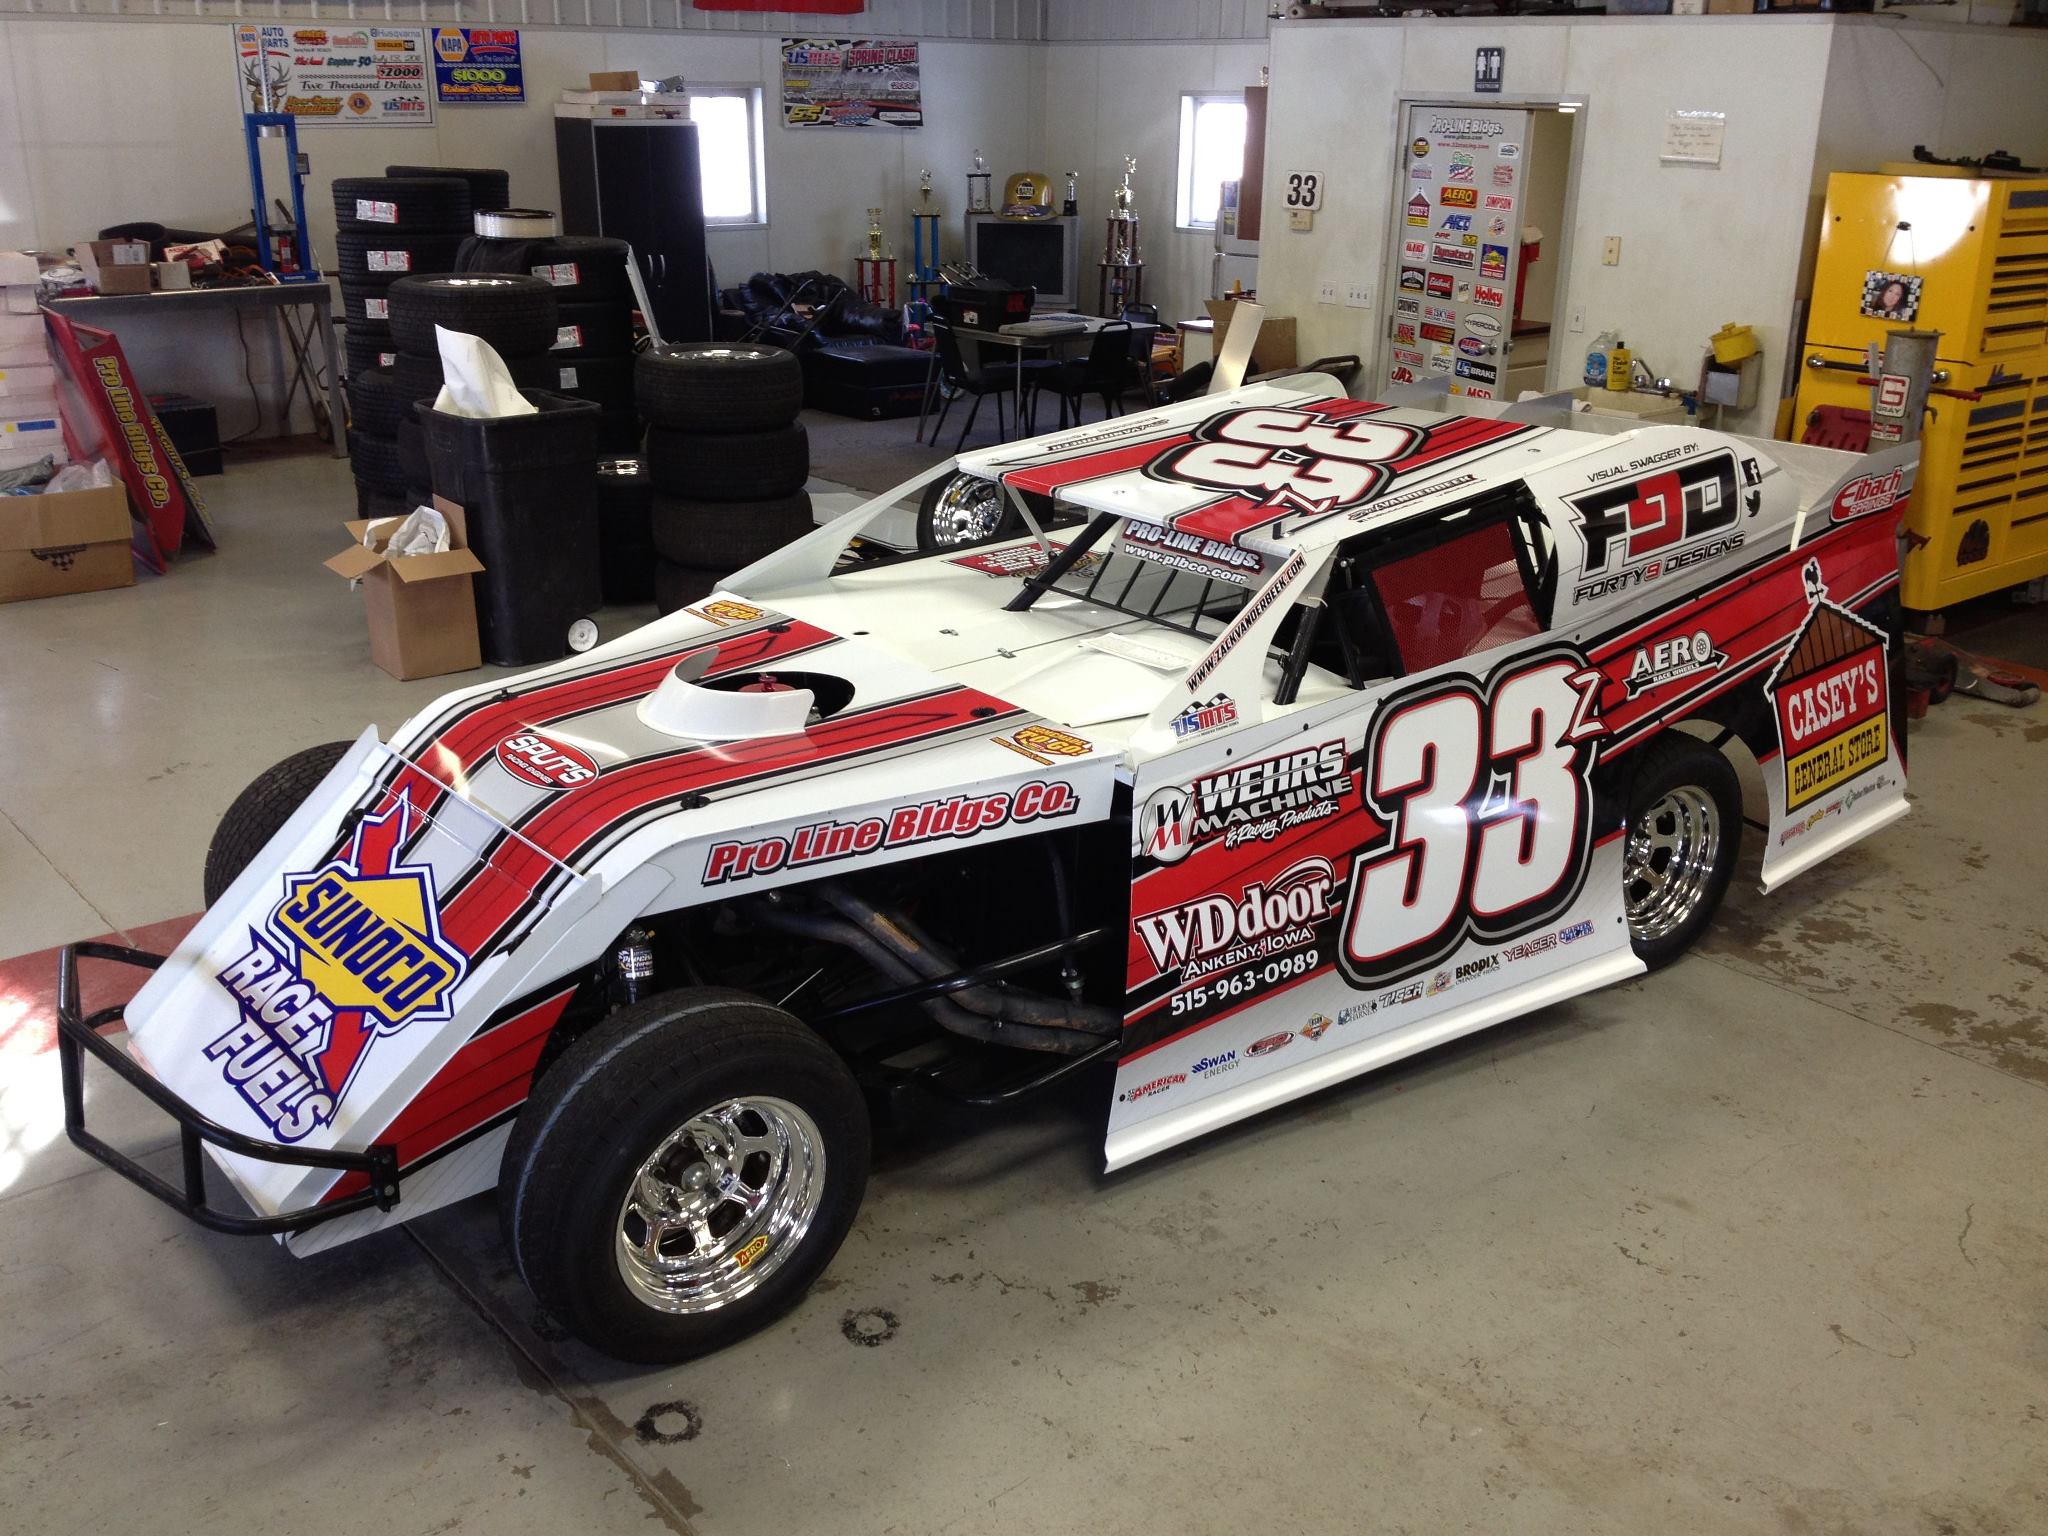 VanderBeek teams up with Caseys General Stores once again for 2013